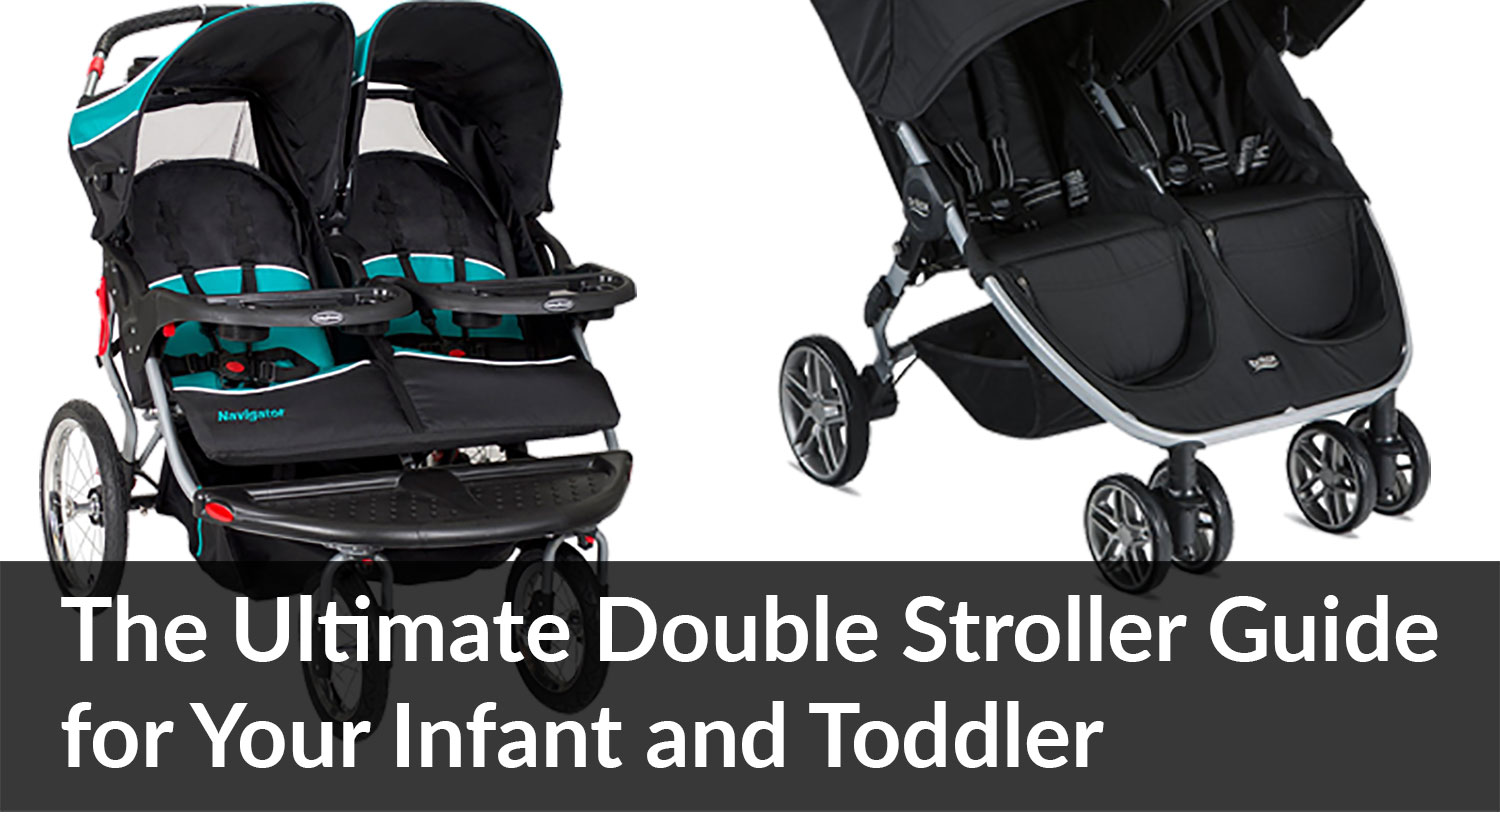 Best Double Stroller Guide for Infant and Toddler